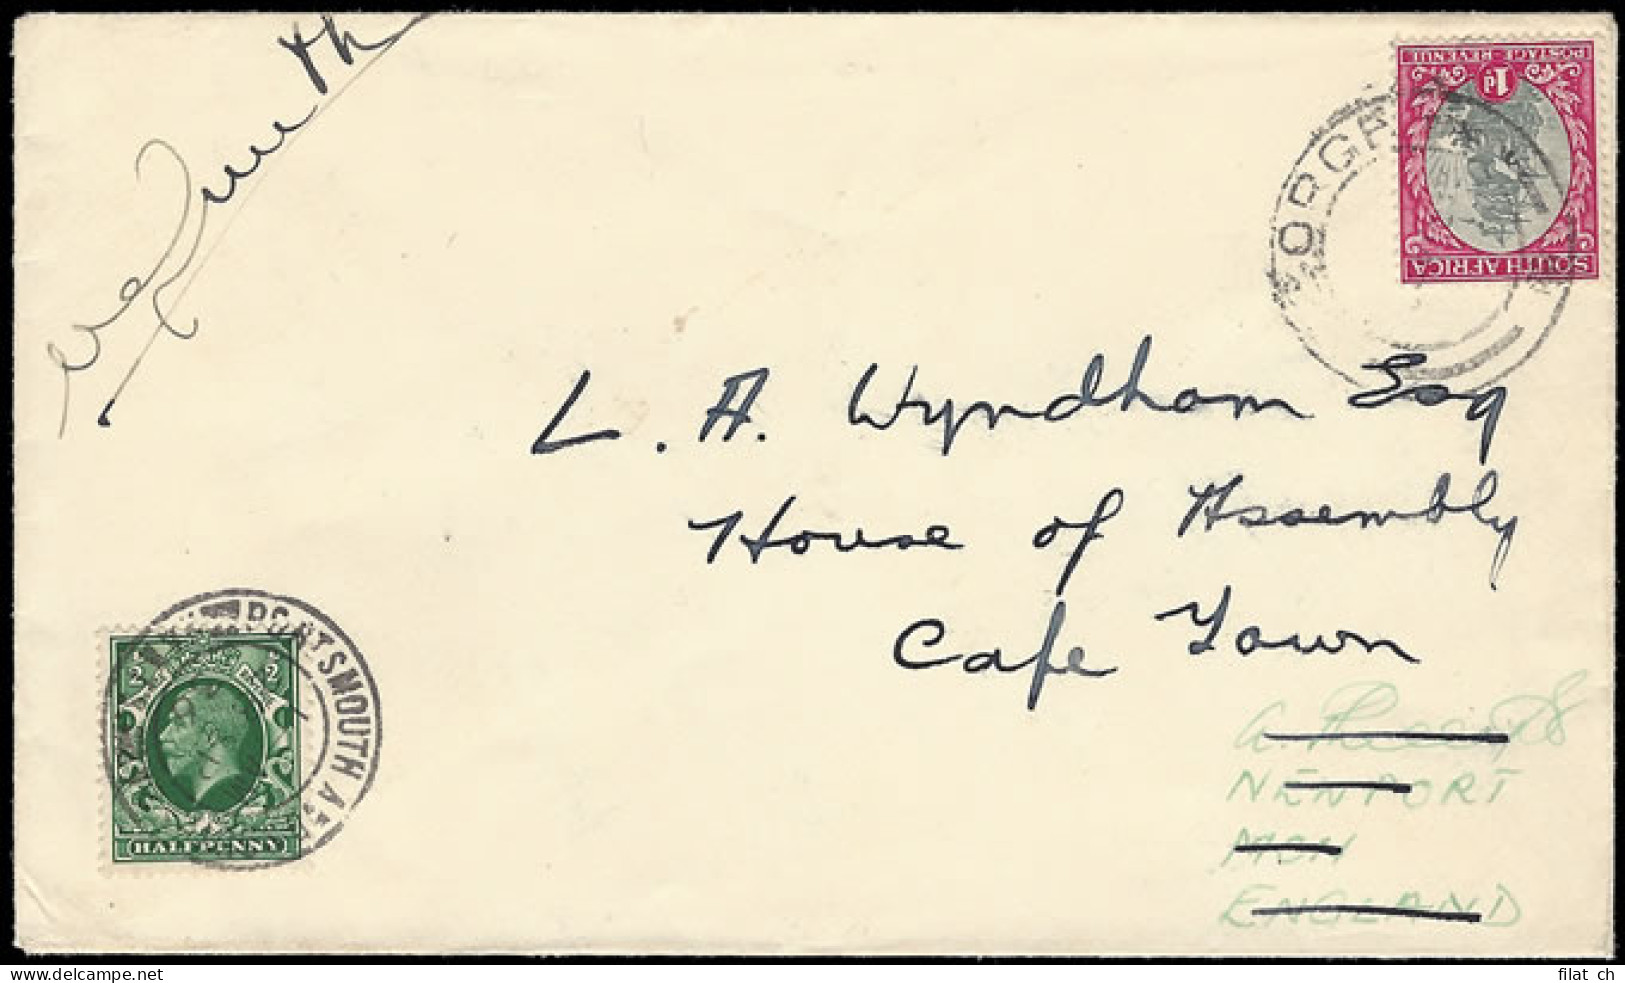 SOUTH AFRICA 1936 SCHLESINGER AIR RACE VICTOR SMITH SIGNED COVER - Luftpost